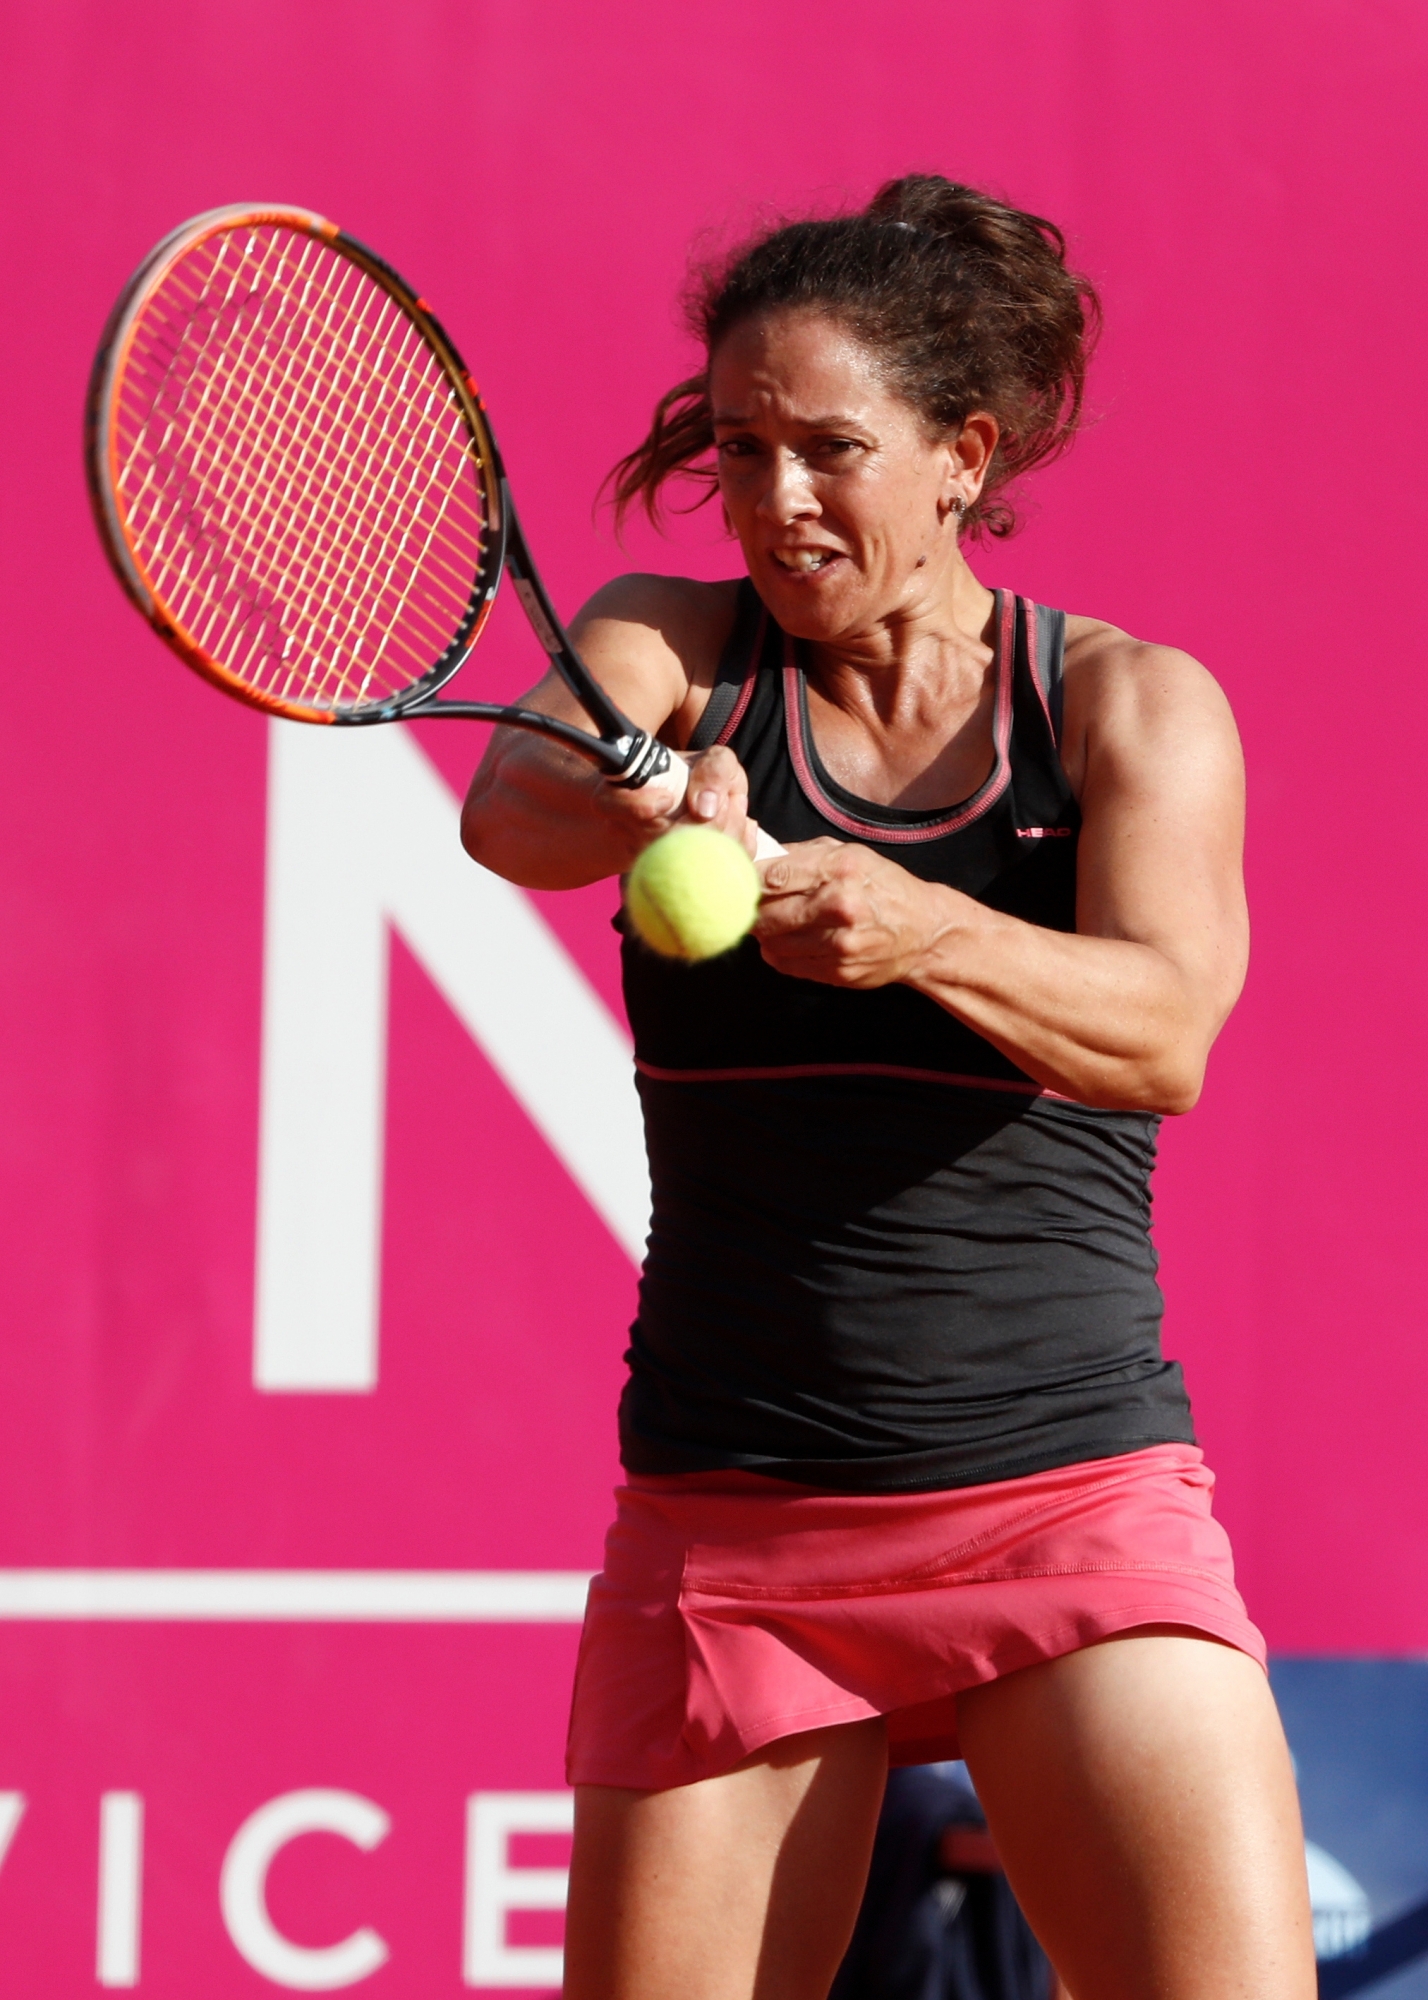 Patty Schnyder of Switzerland in action during her second round match against Antonia Lottner of Germany, at the WTA Ladies Championship tennis tournament in Gstaad, Switzerland, July 20, 2017. (KEYSTONE/Peter Klaunzer) TENNIS WTA TOUR 2017 GSTAAD